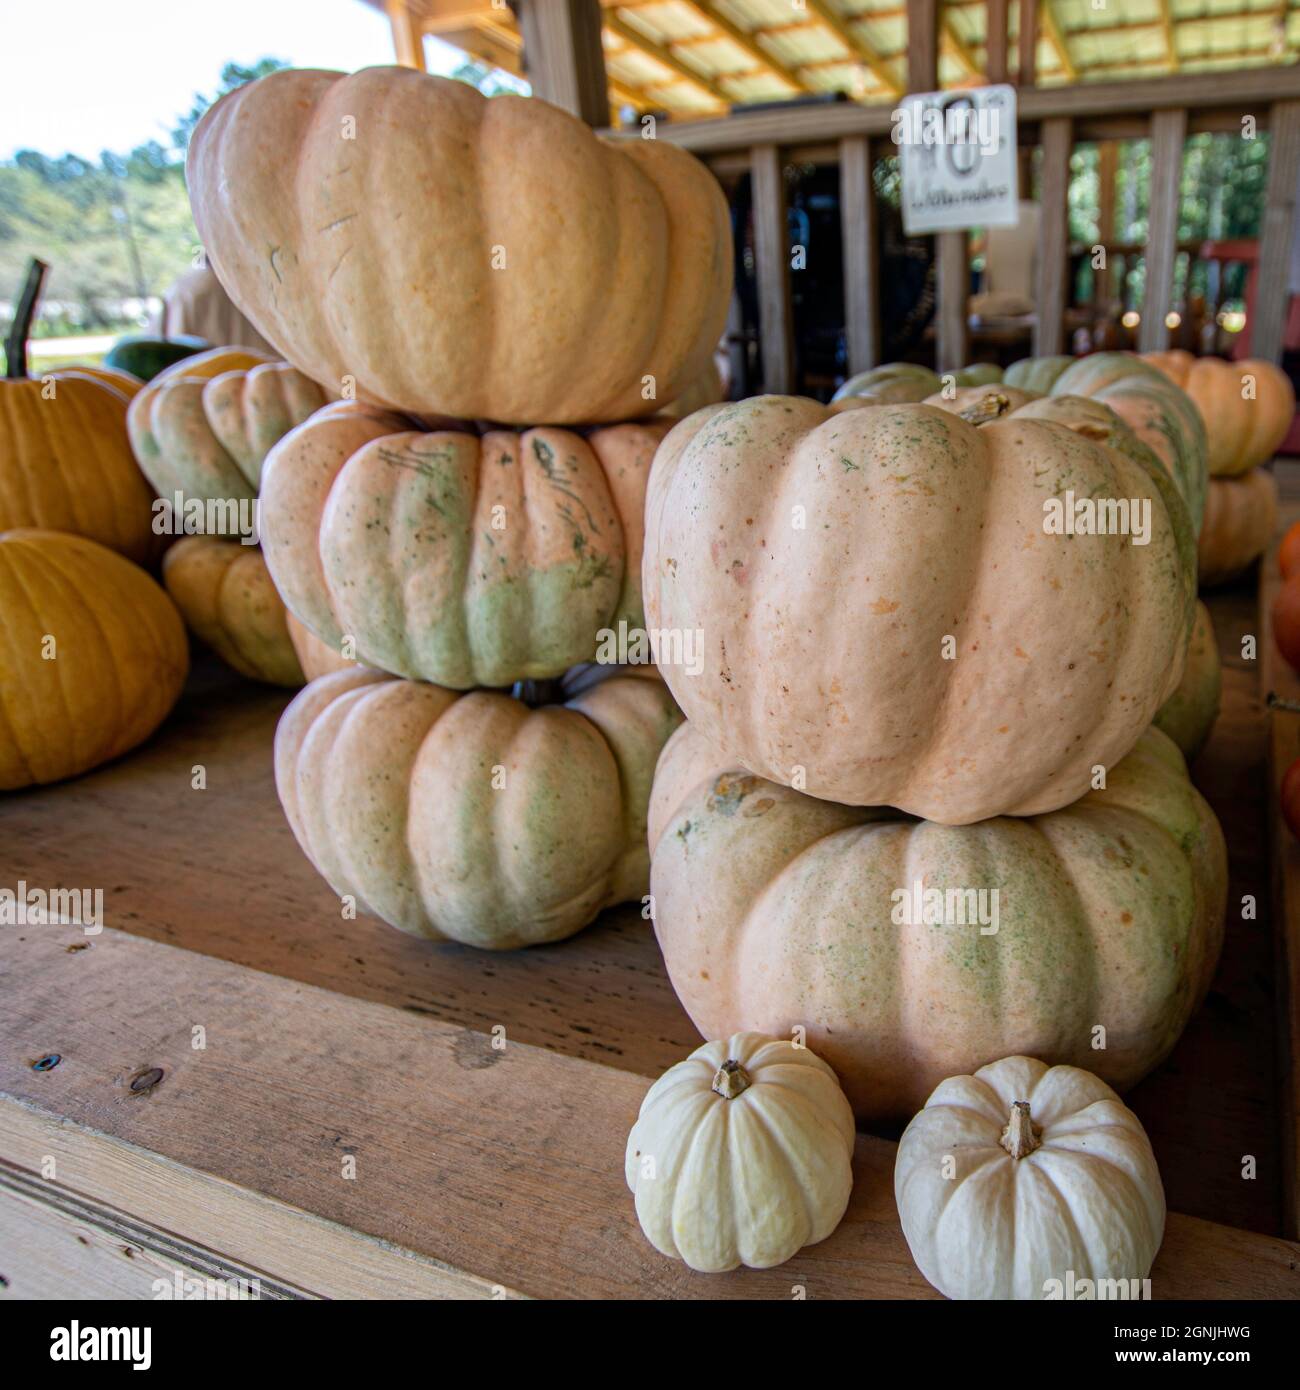 Assorted cultivars of pumpkins displayed at an outdoor roadside produce stand. Stock Photo